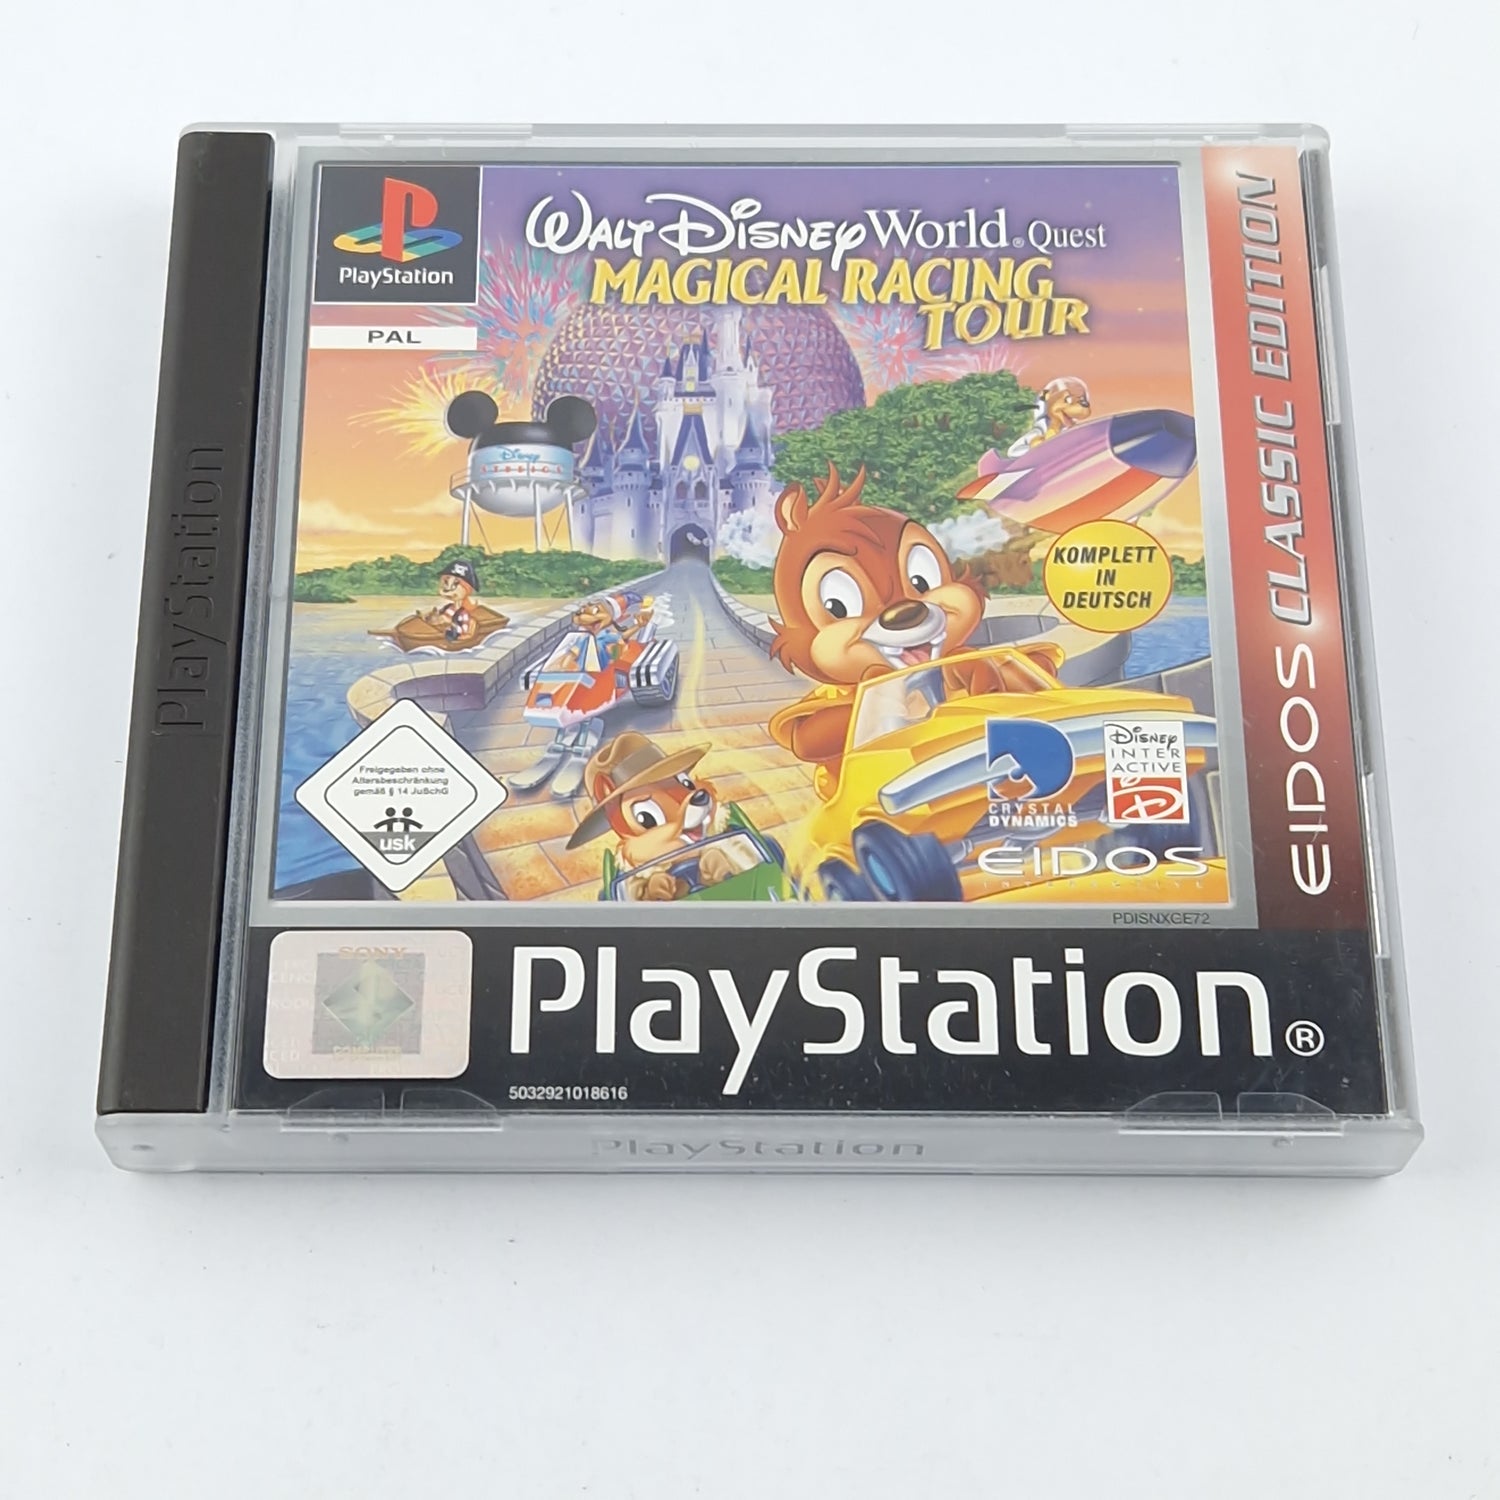 Playstation 1 Spiel : Magical Racing Tour - CD Anleitung OVP / SONY PS1 Psx PAL